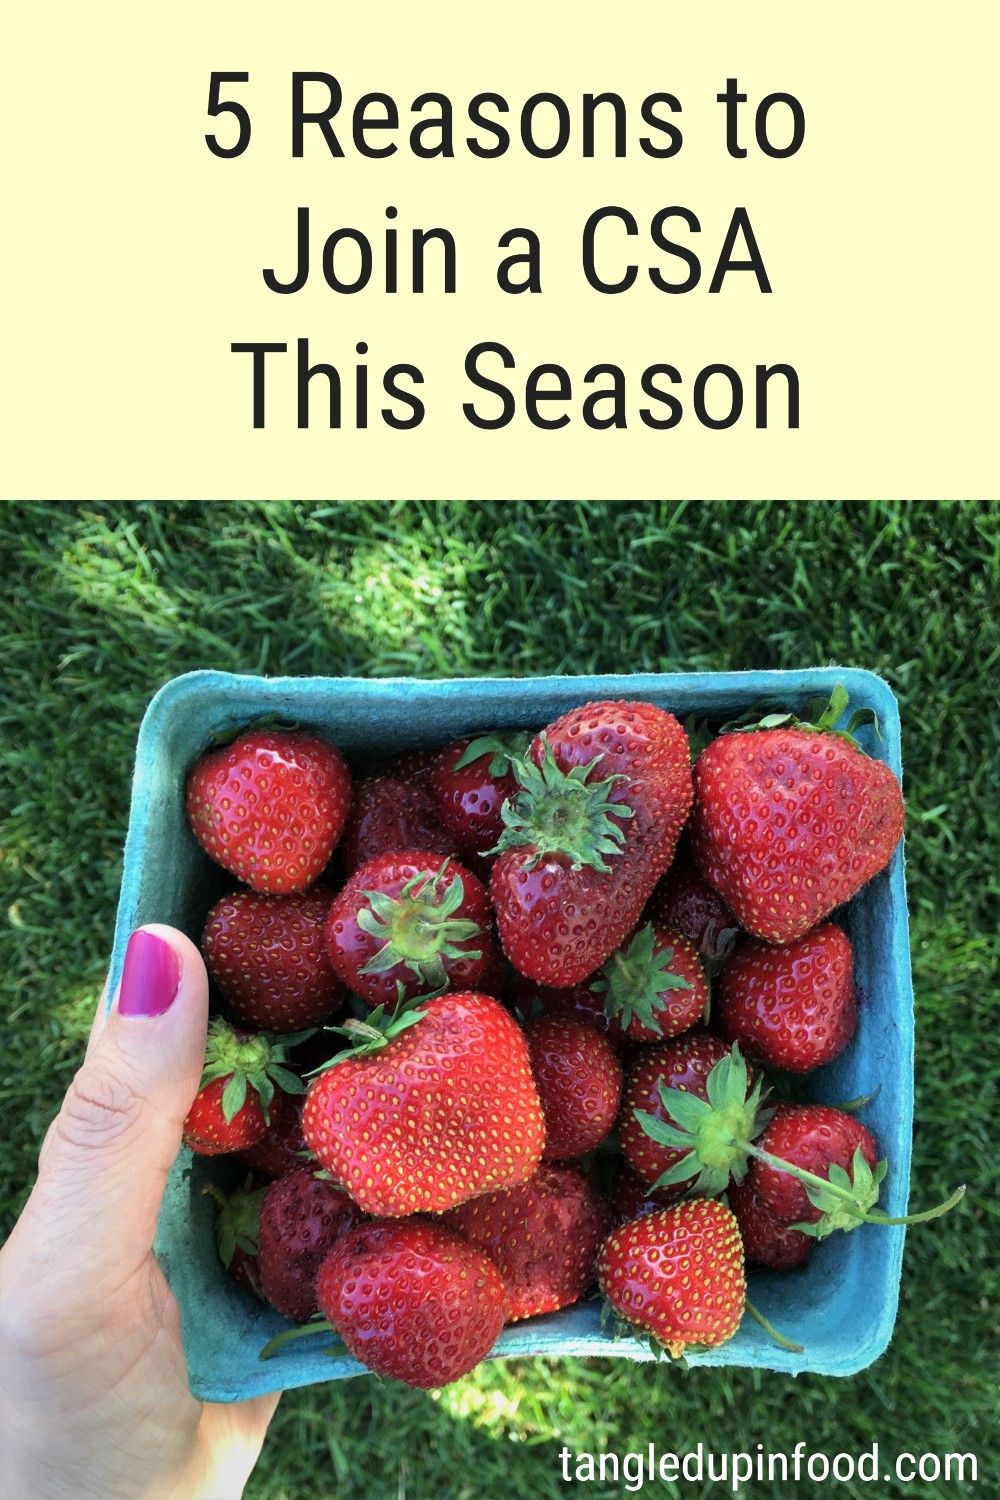 Hand holding basket of strawberries with text reading "5 reasons to join a CSA this season"